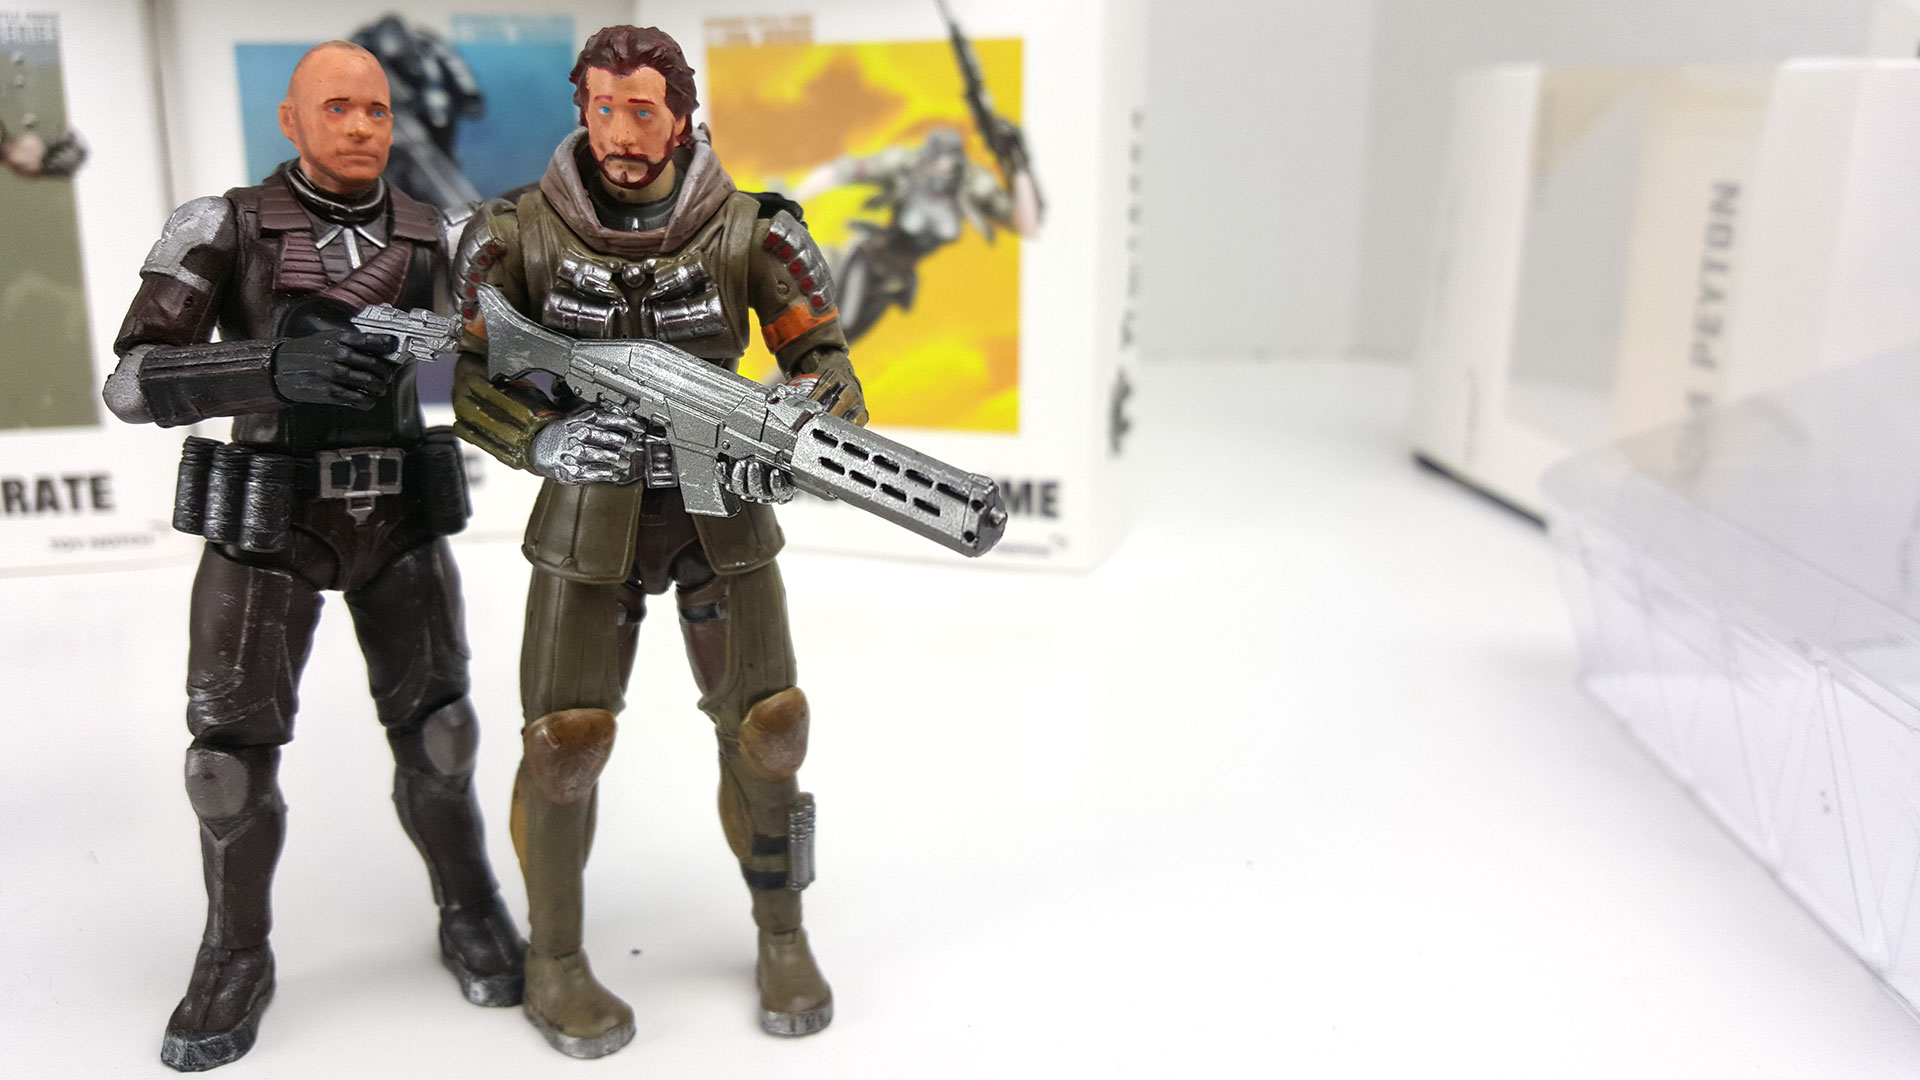 Lost Planet Action Figures Are Better Than Most Lost Planet Games